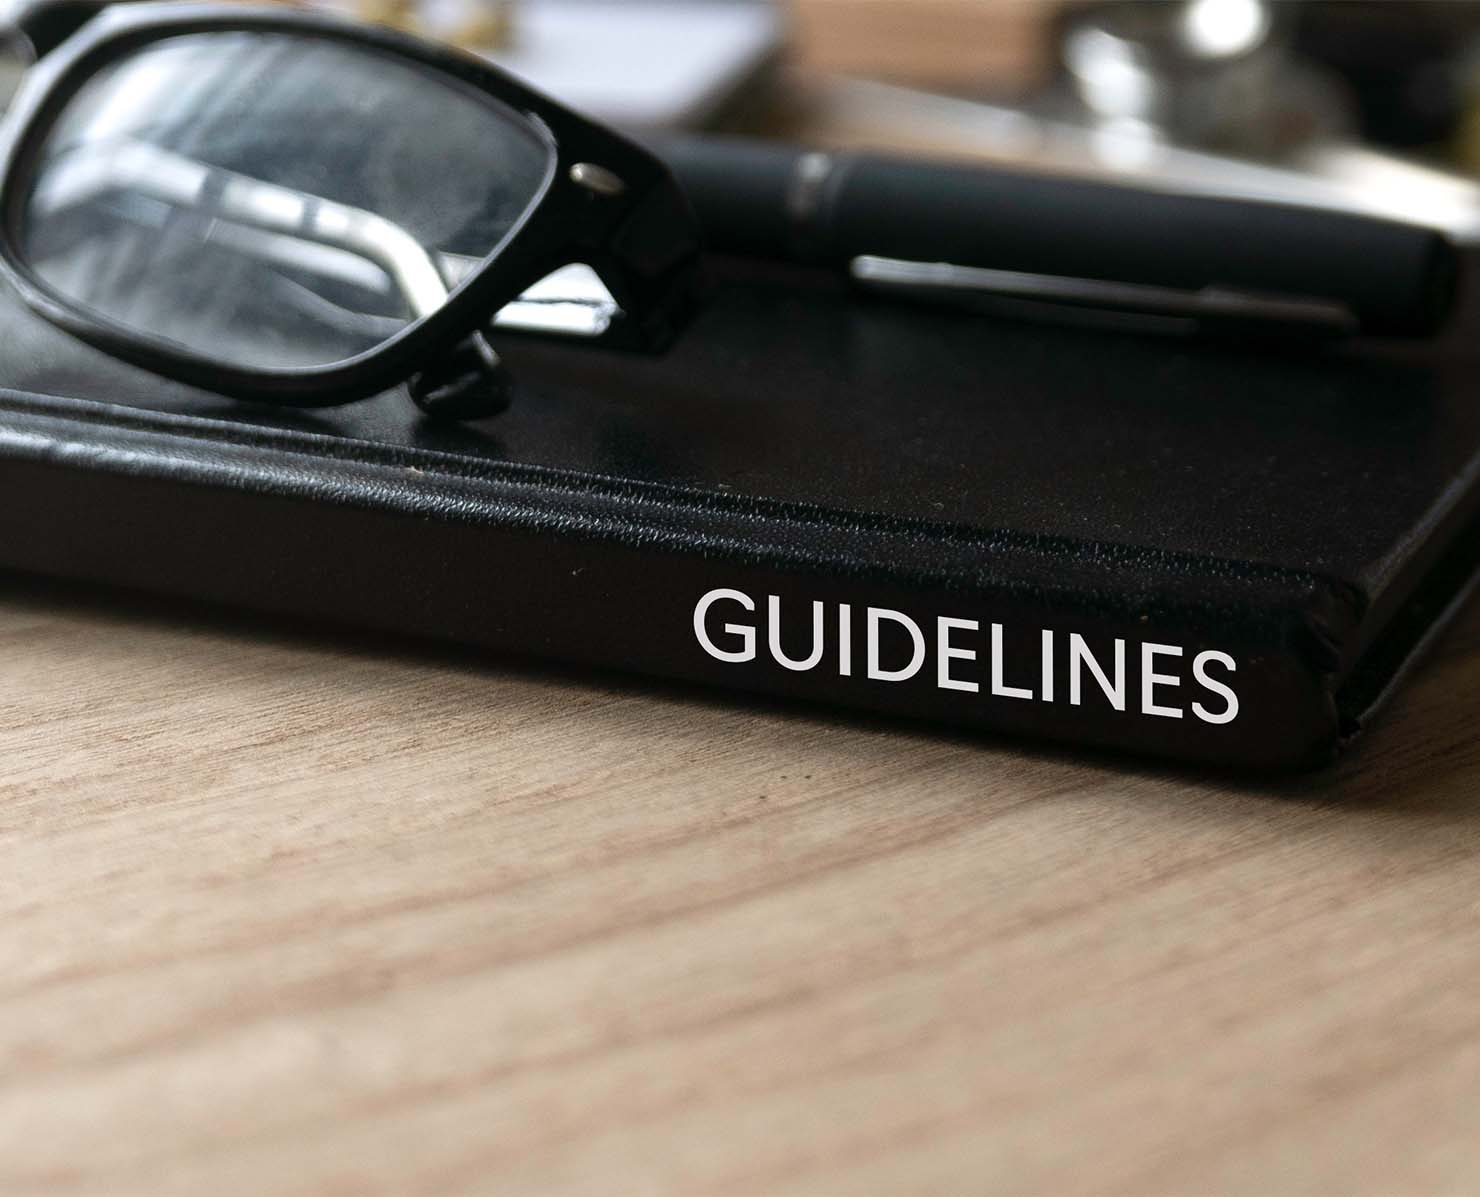 Glasses on top of guidelines book